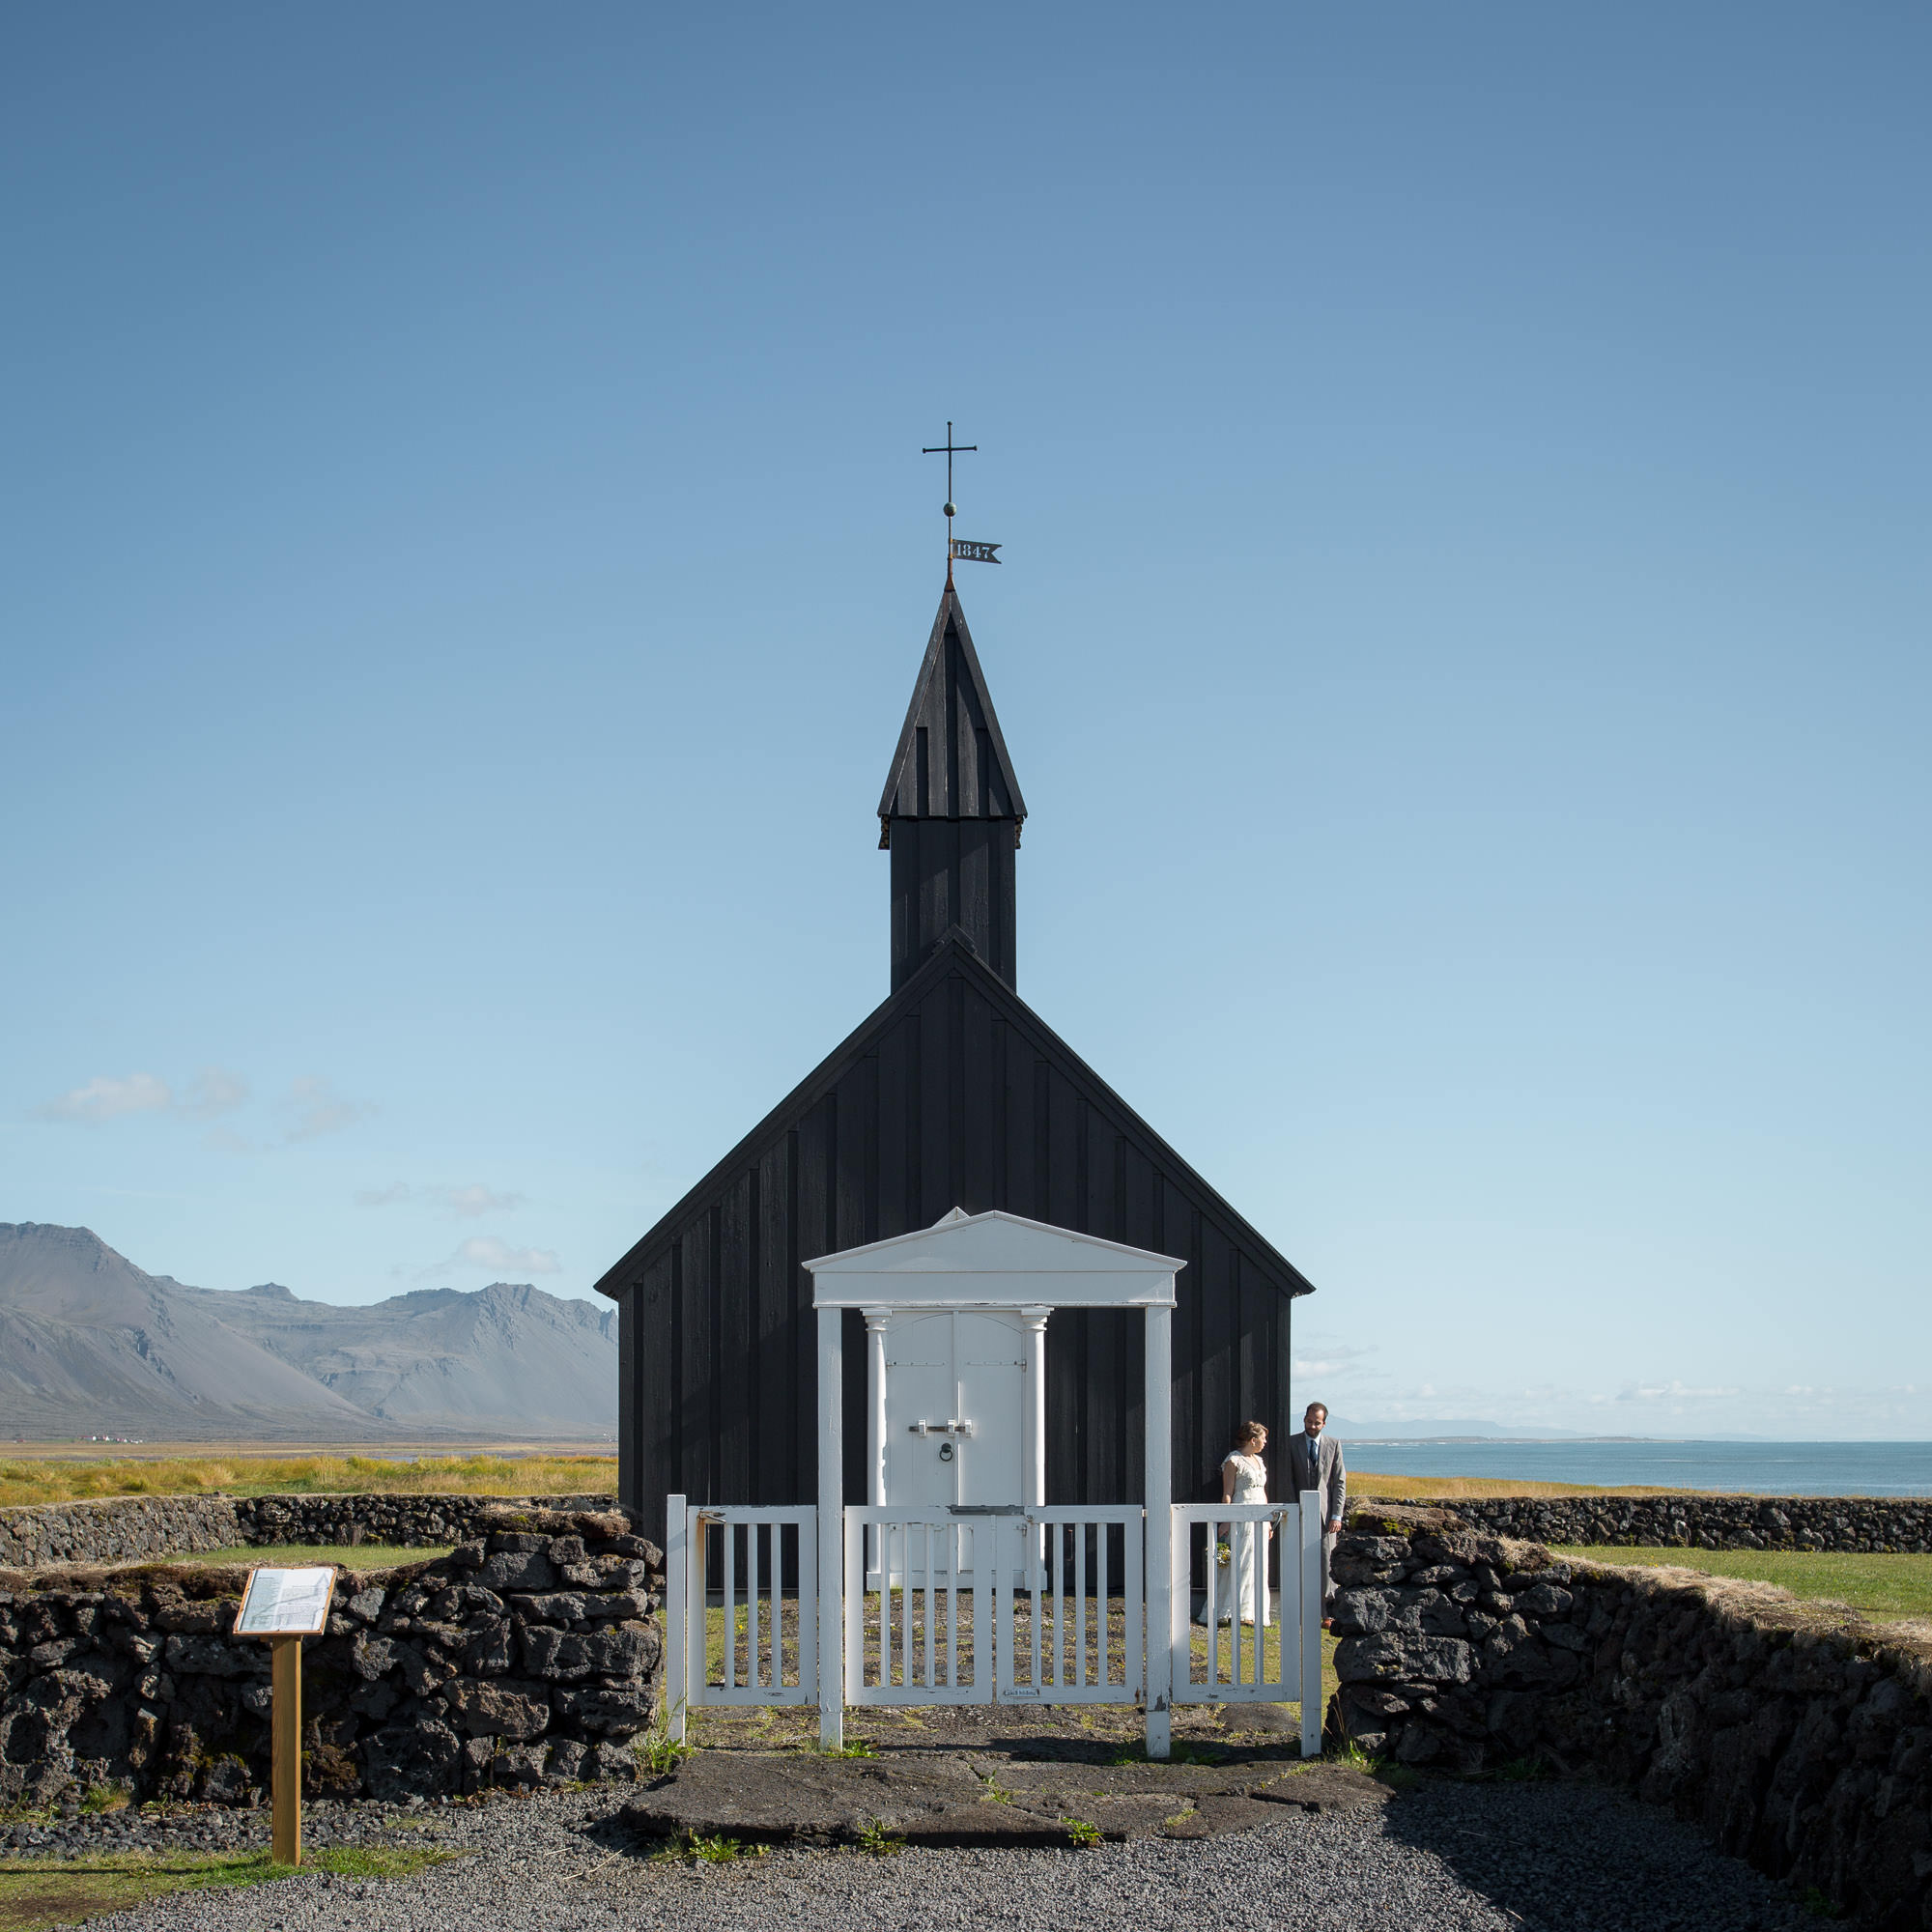 mike-kelley-iceland-architecture-15.jpg